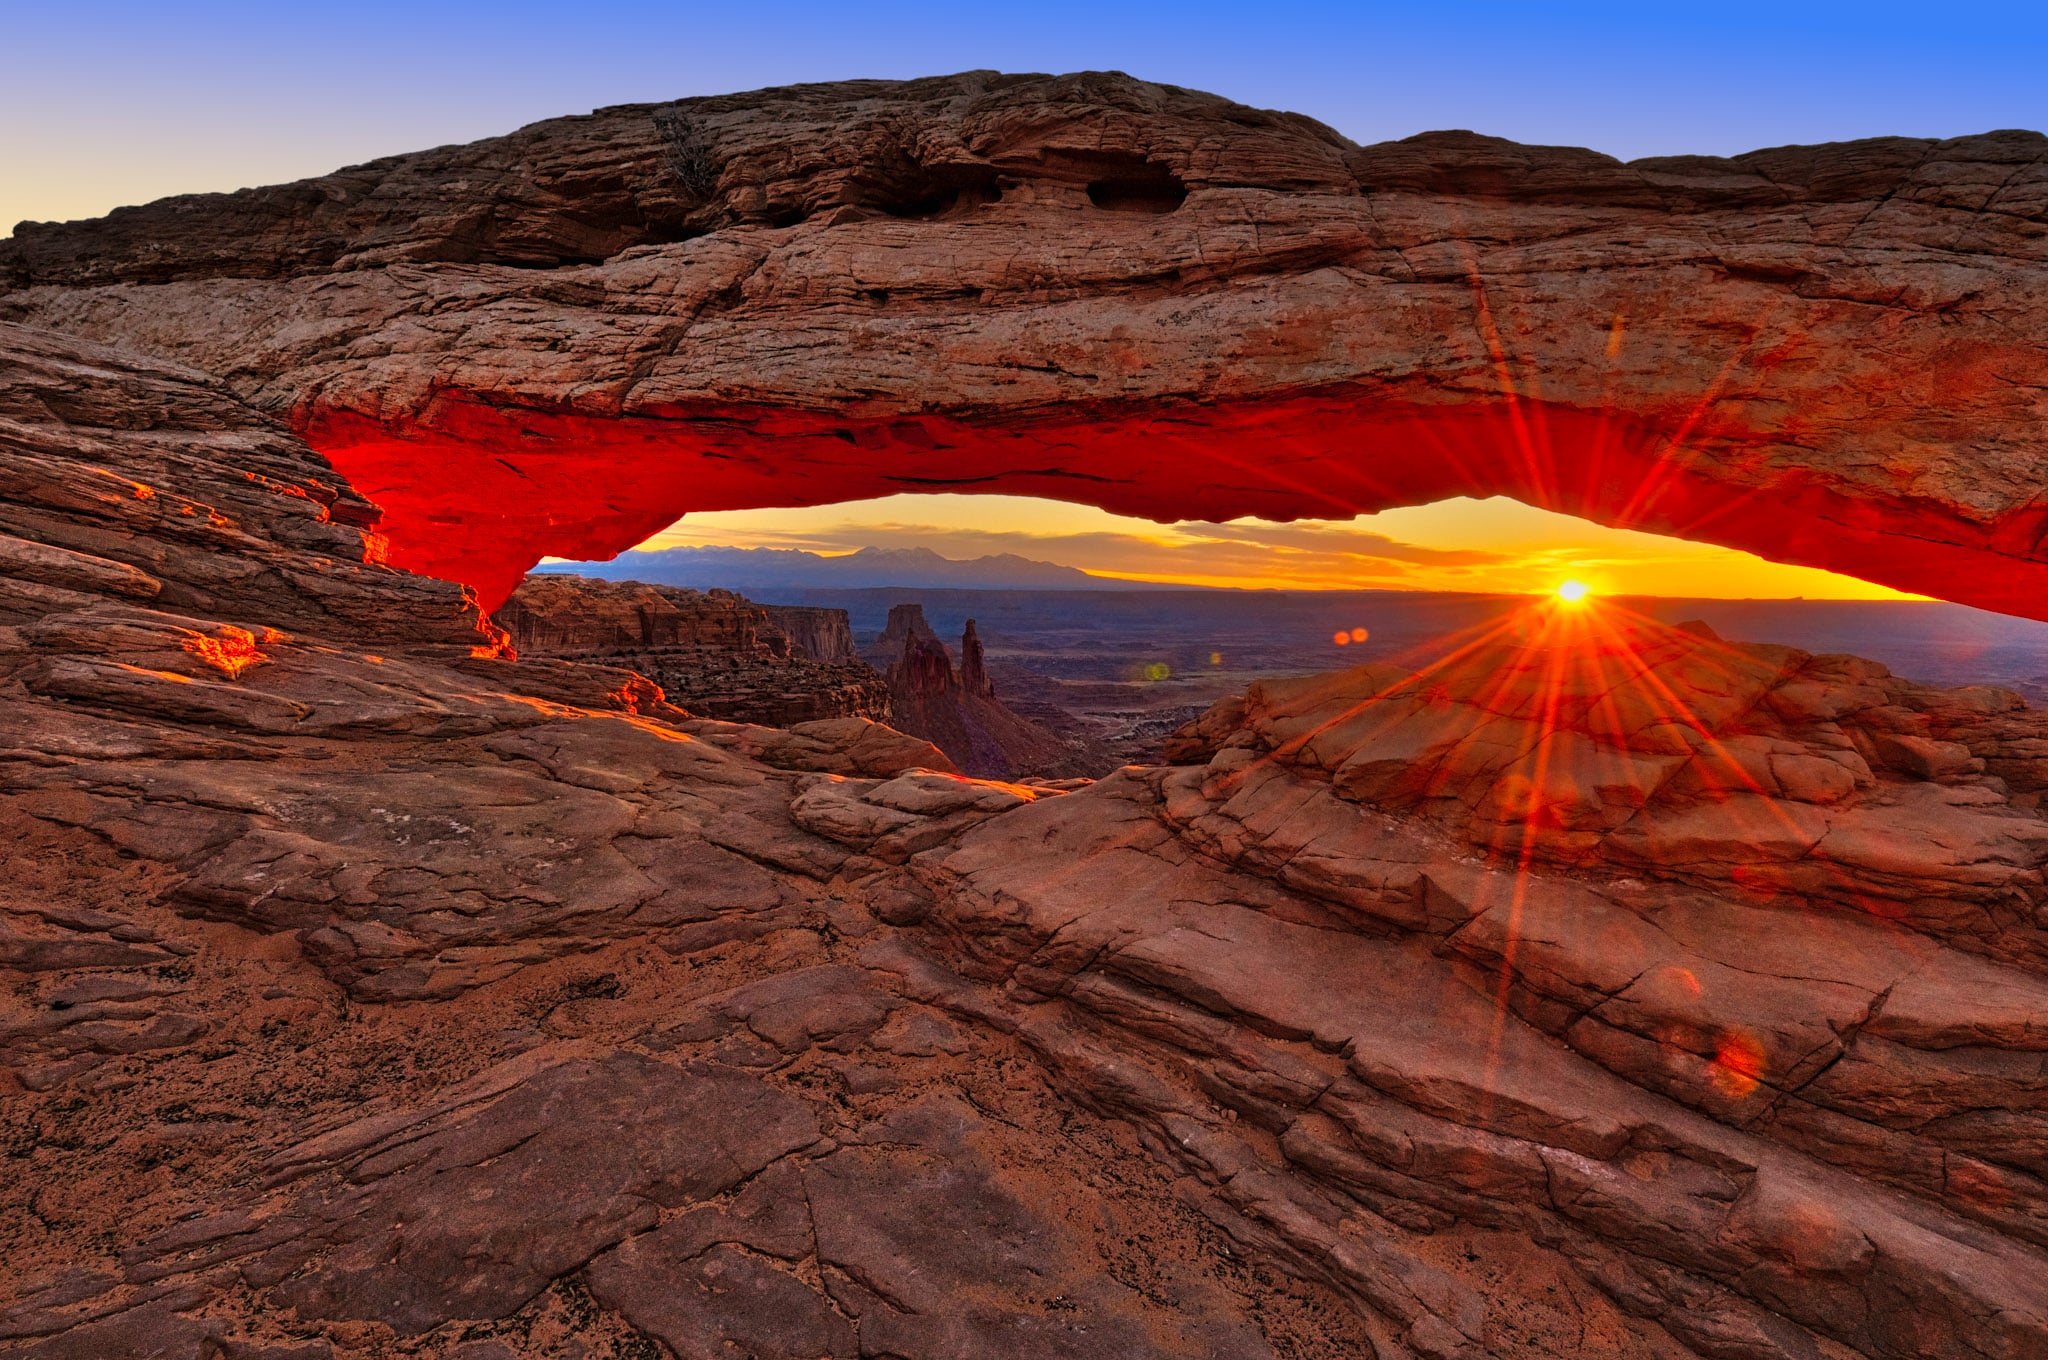 At dawn, looking east through Mesa Arch in Canyonlands National Park.